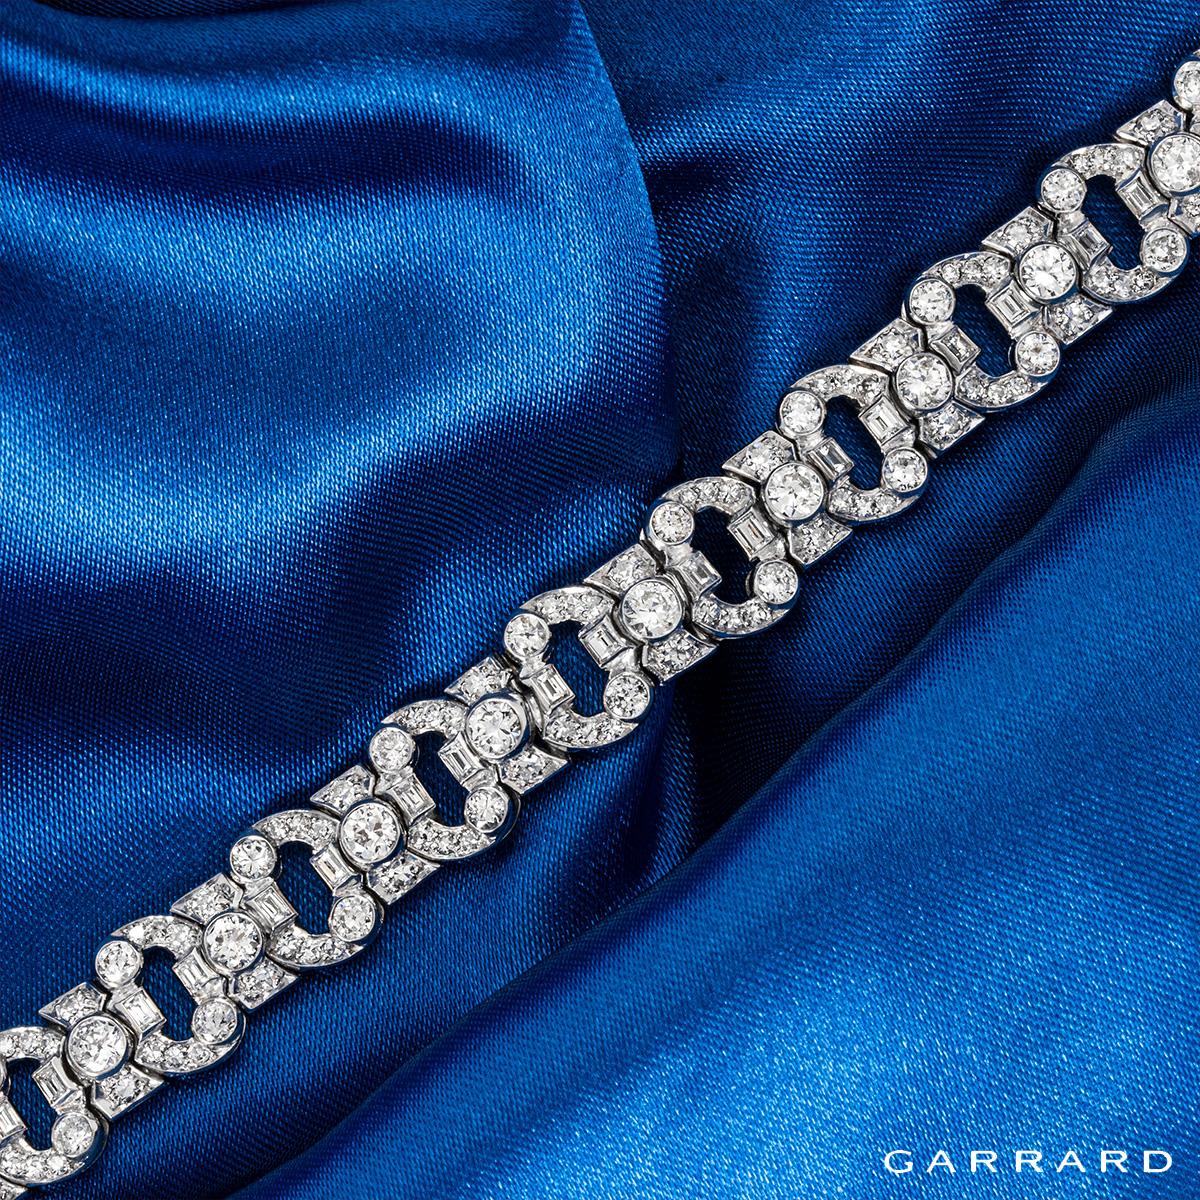 A magnificent platinum diamond bracelet by Garrard. This bracelet is meticulously crafted with 15 round brilliant cut diamonds bezel set through the centre with an approximate total weight of 2.45ct, E-F colour and VS-SI clarity. Further